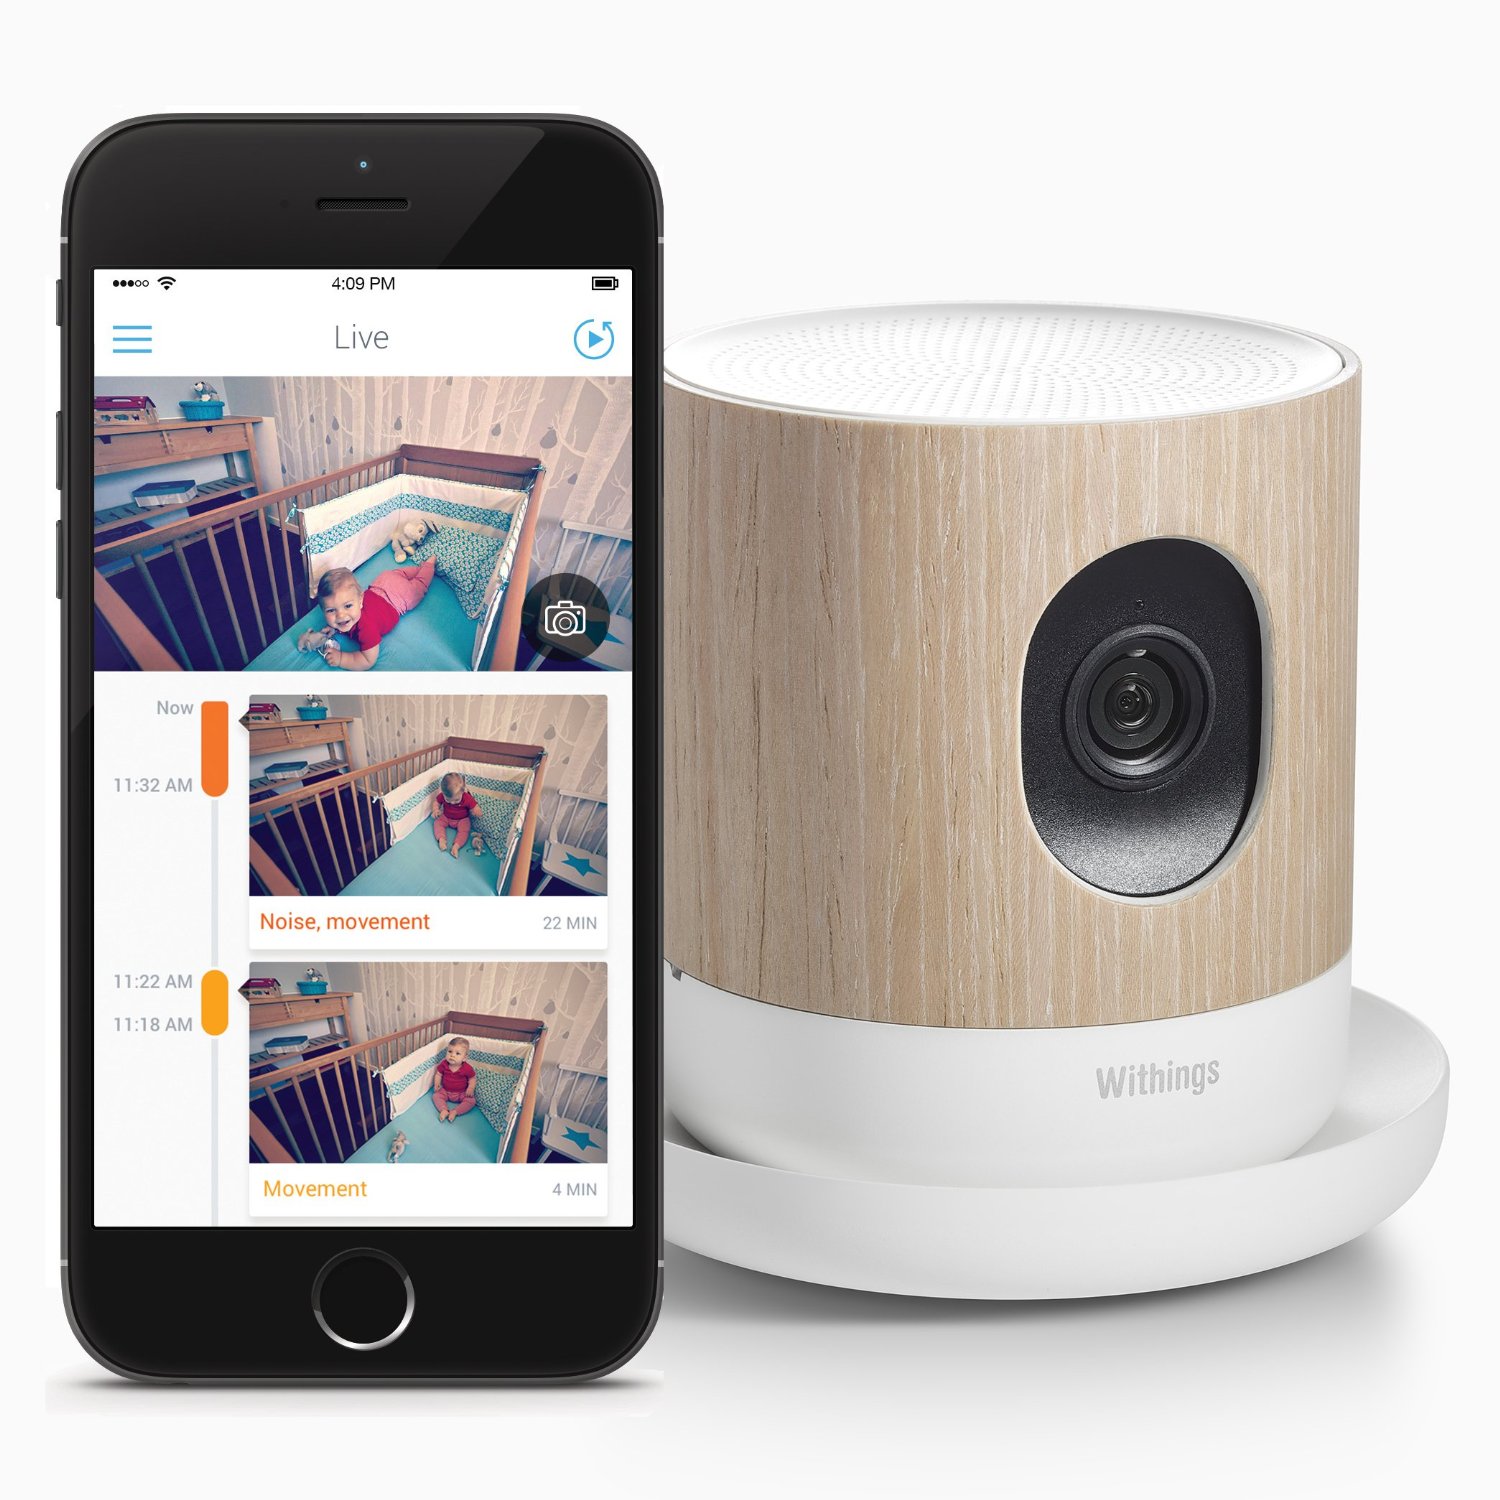 DELA DISCOUNT Withings-Baby-Monitor-5 Wireless Monitor Camera DELA DISCOUNT  